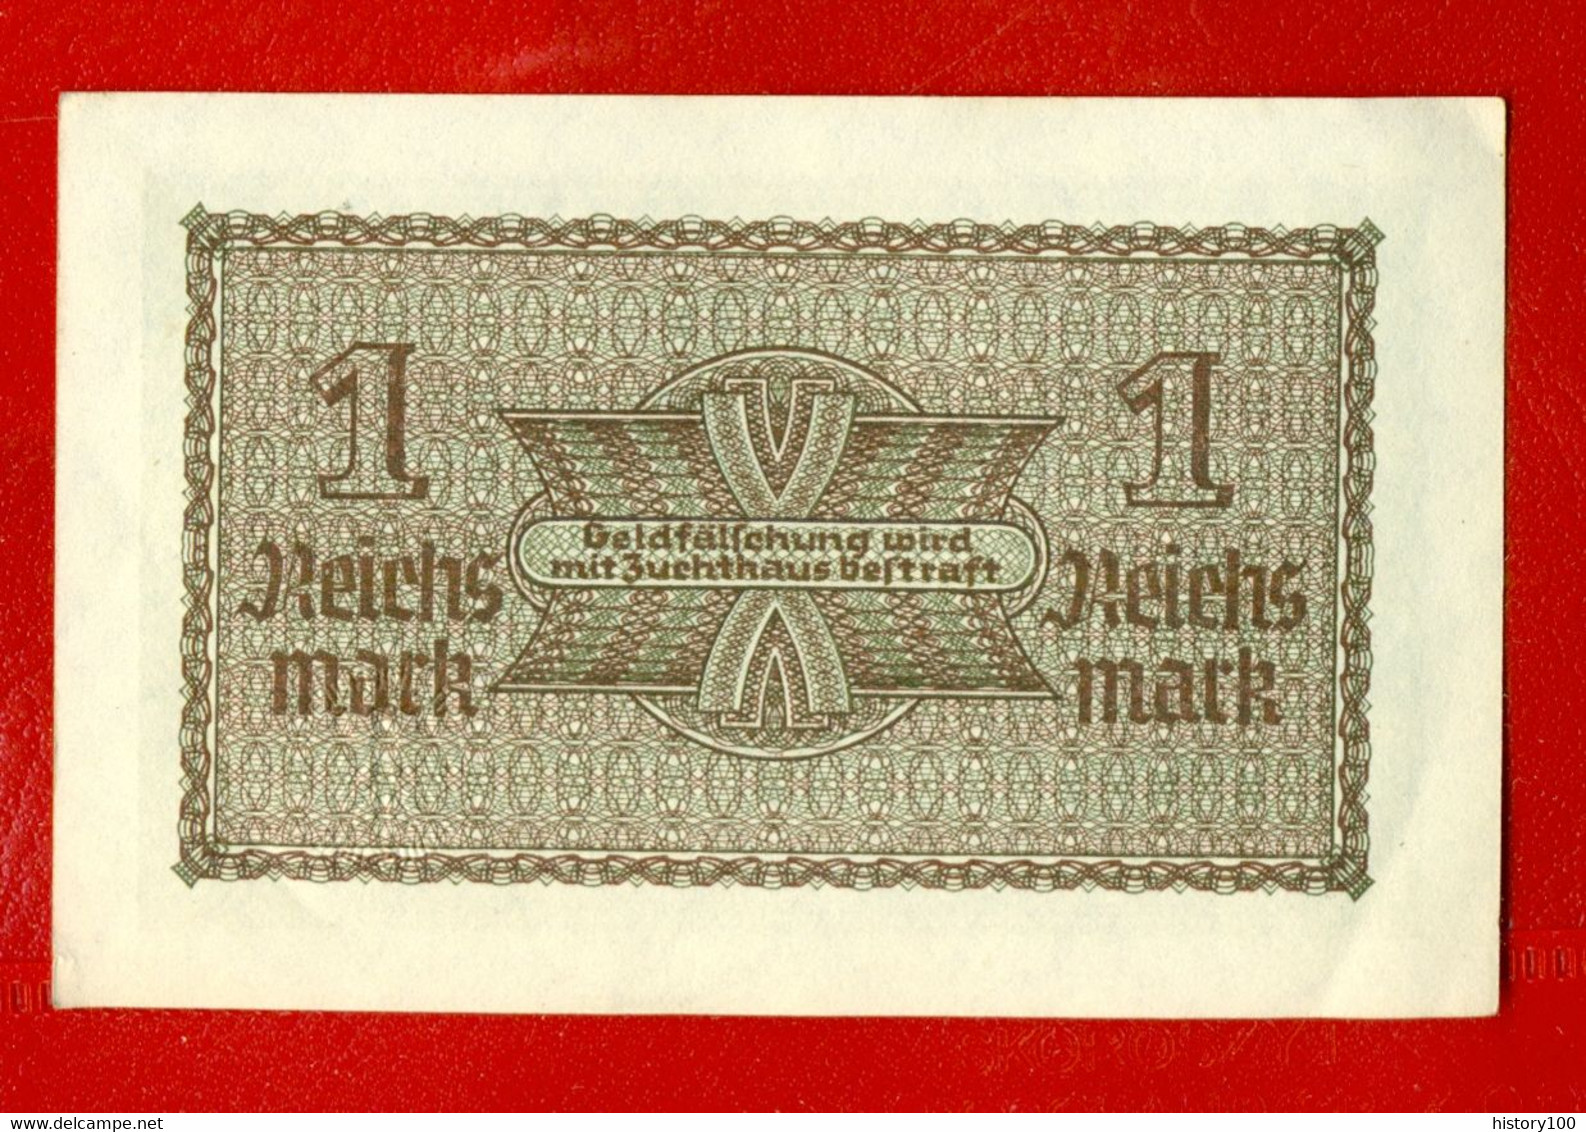 GERMANY LATVIA OCCUPIED TERRITORIES WWll 1 REICHSMARK 1940-45 P R136a AUNC 300 - 2° Guerra Mondiale